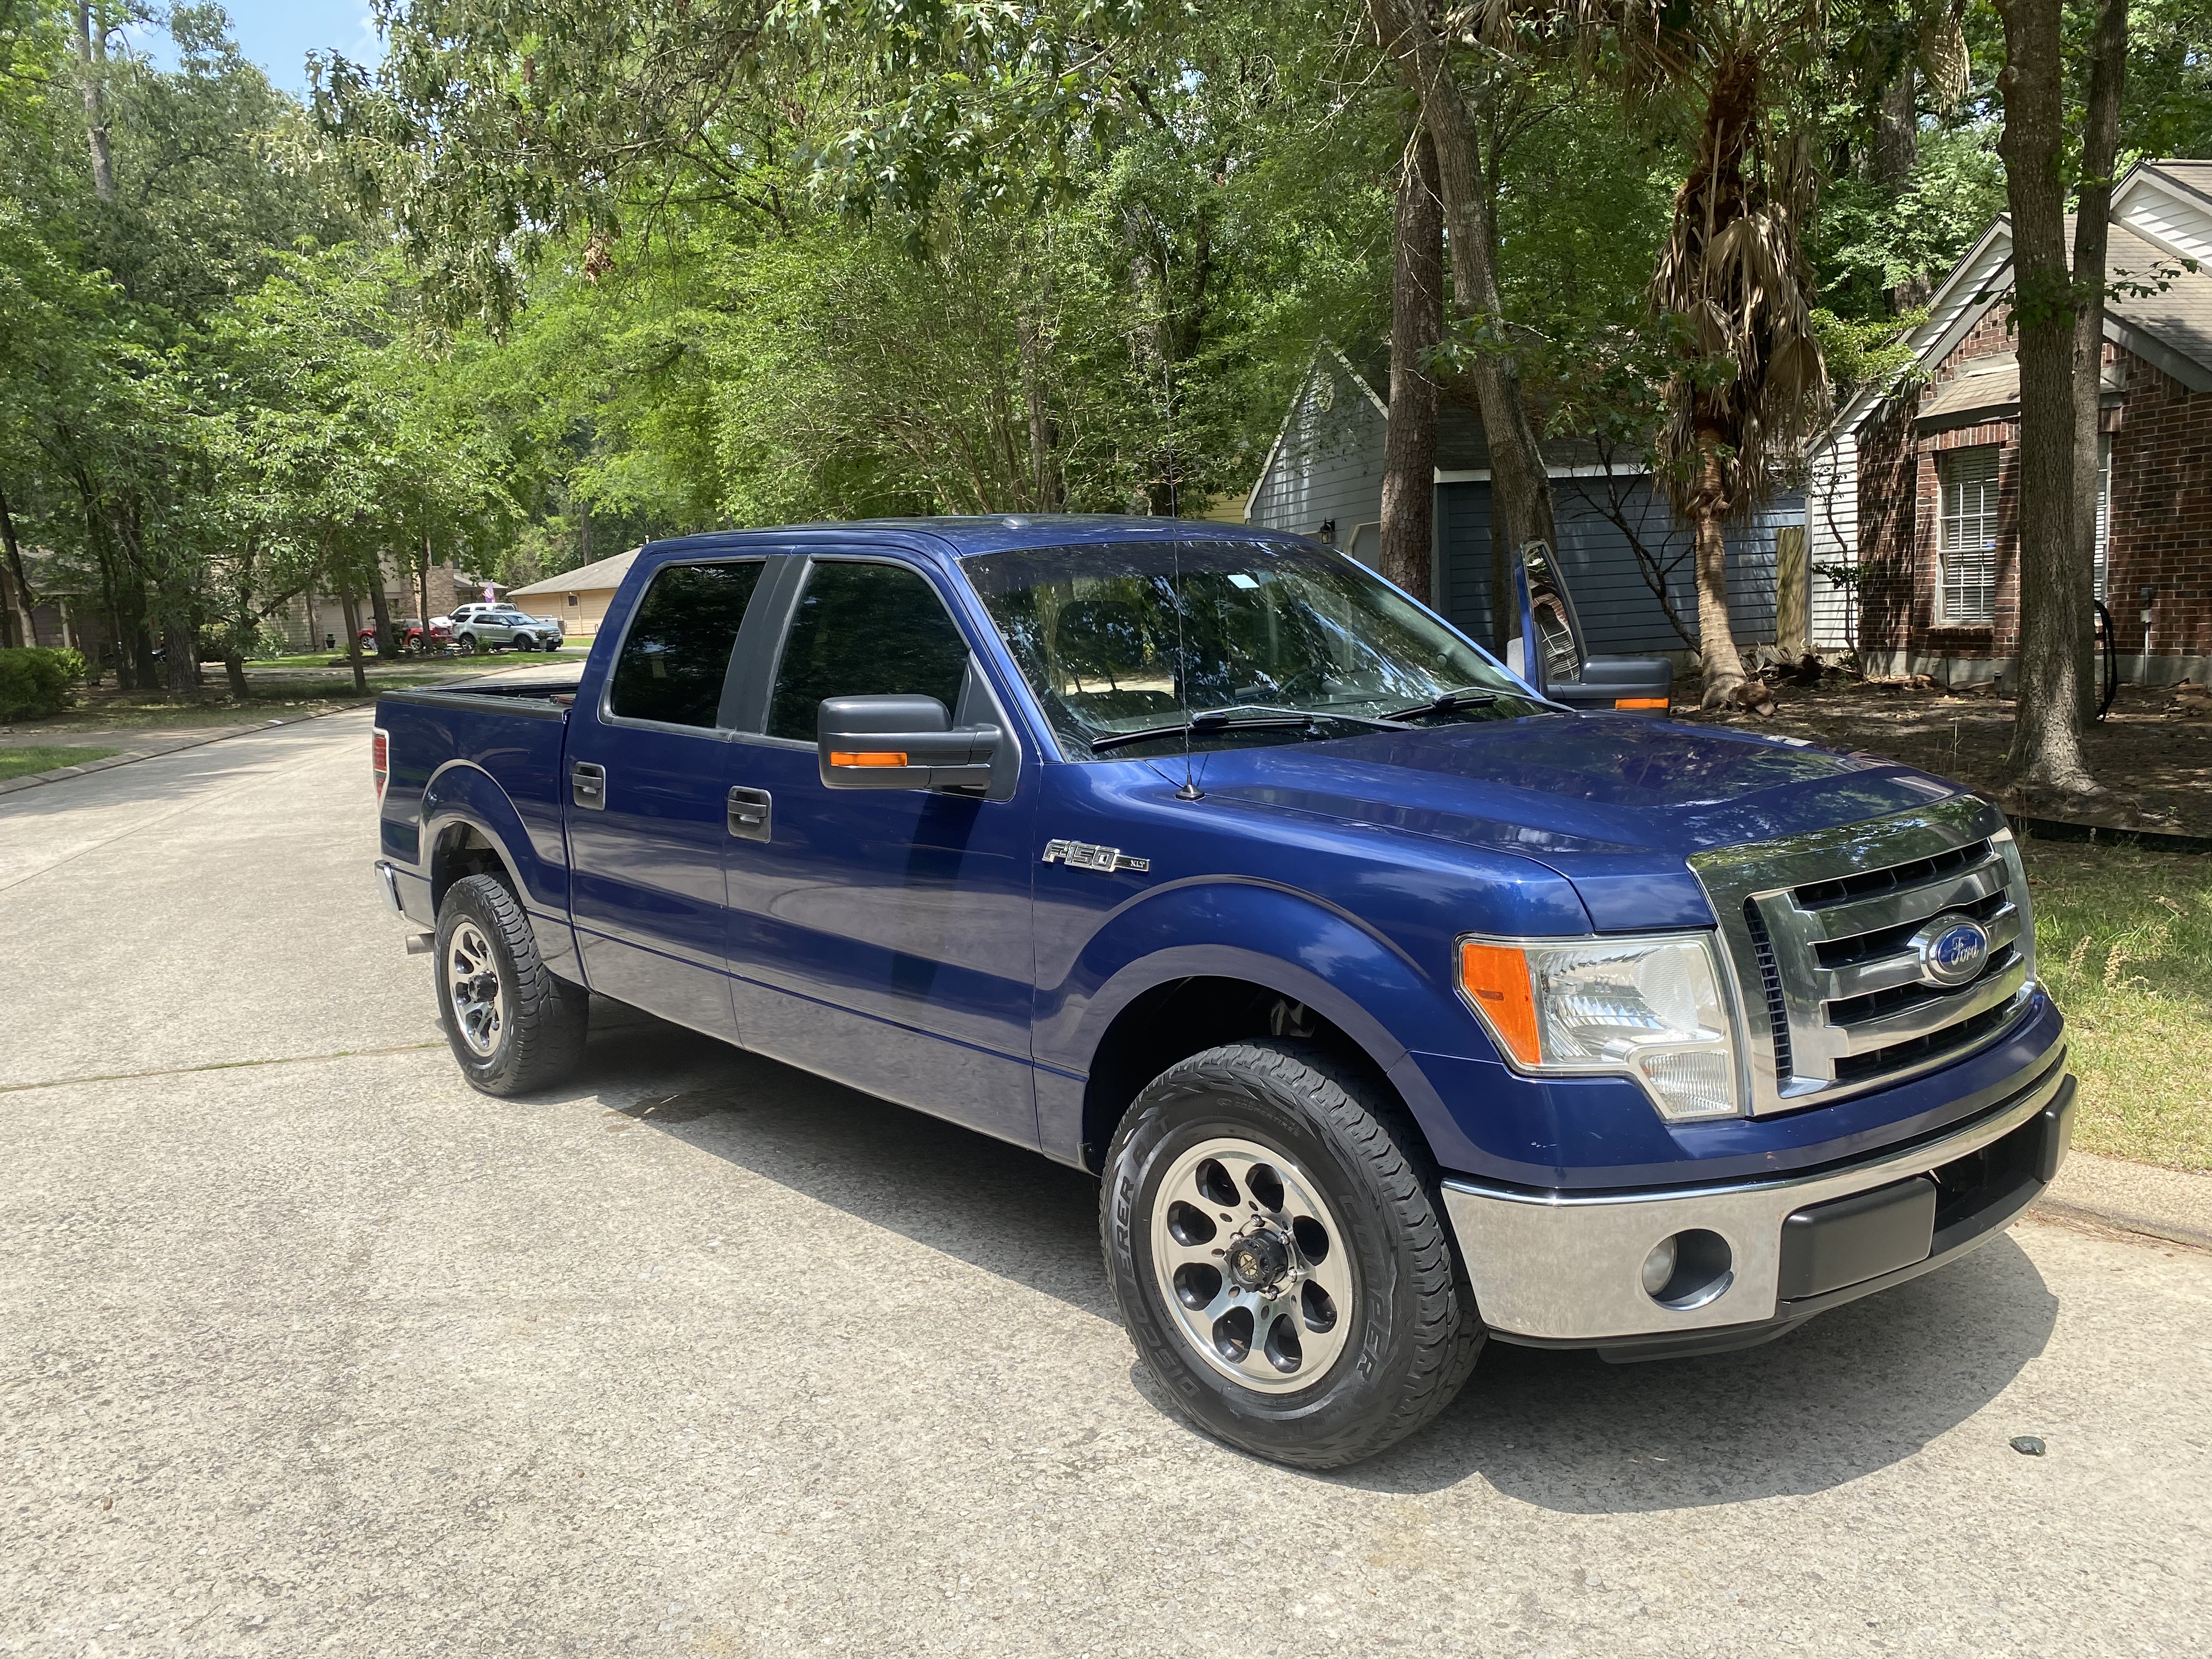 Used 12 Ford F 150 For Sale In Atascocita Tx Cars Com